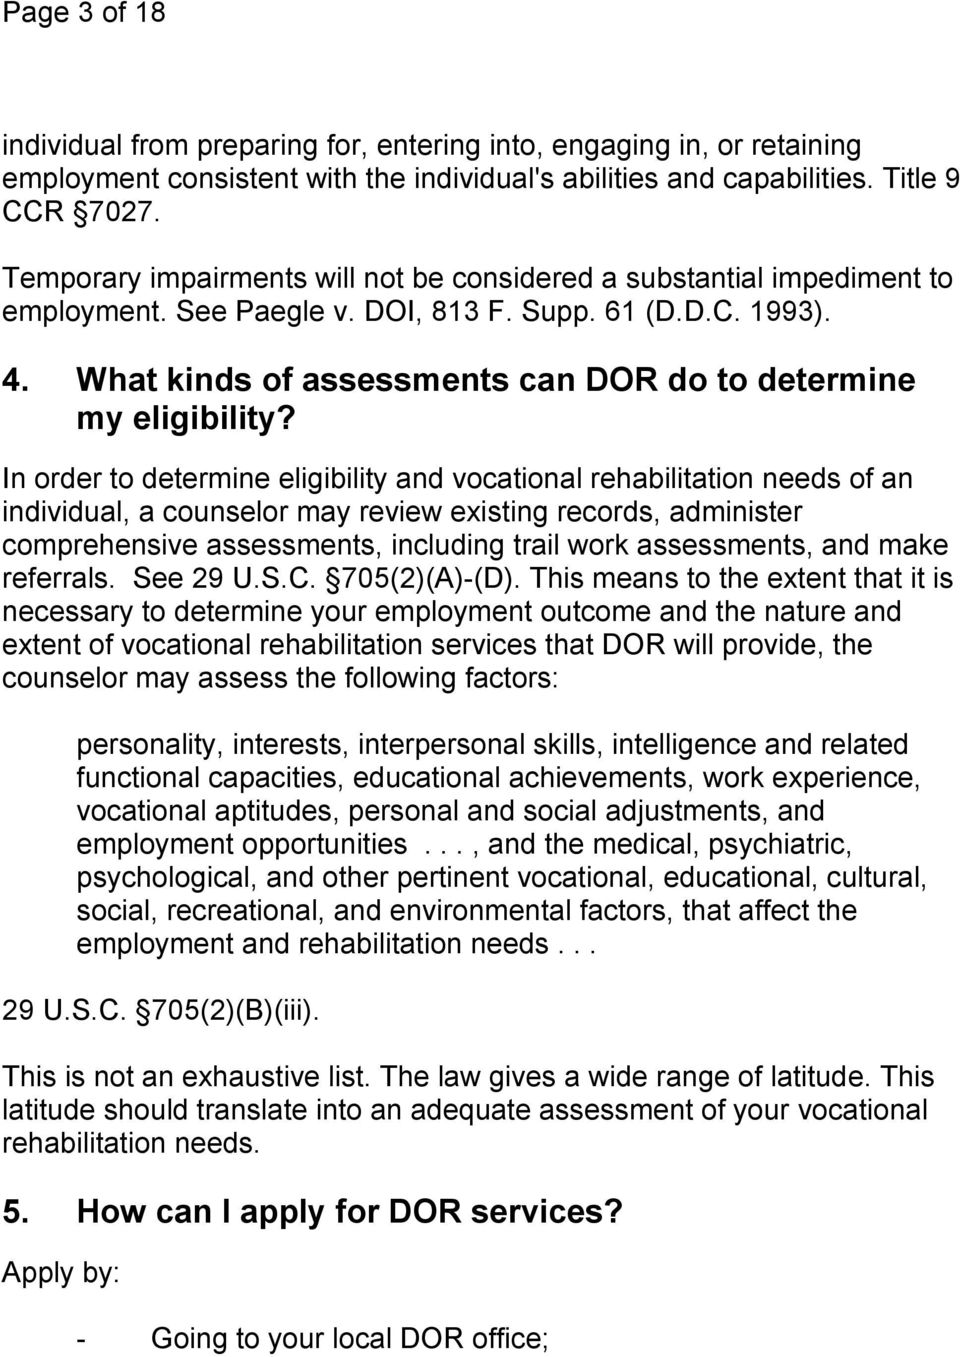 What kinds of assessments can DOR do to determine my eligibility?